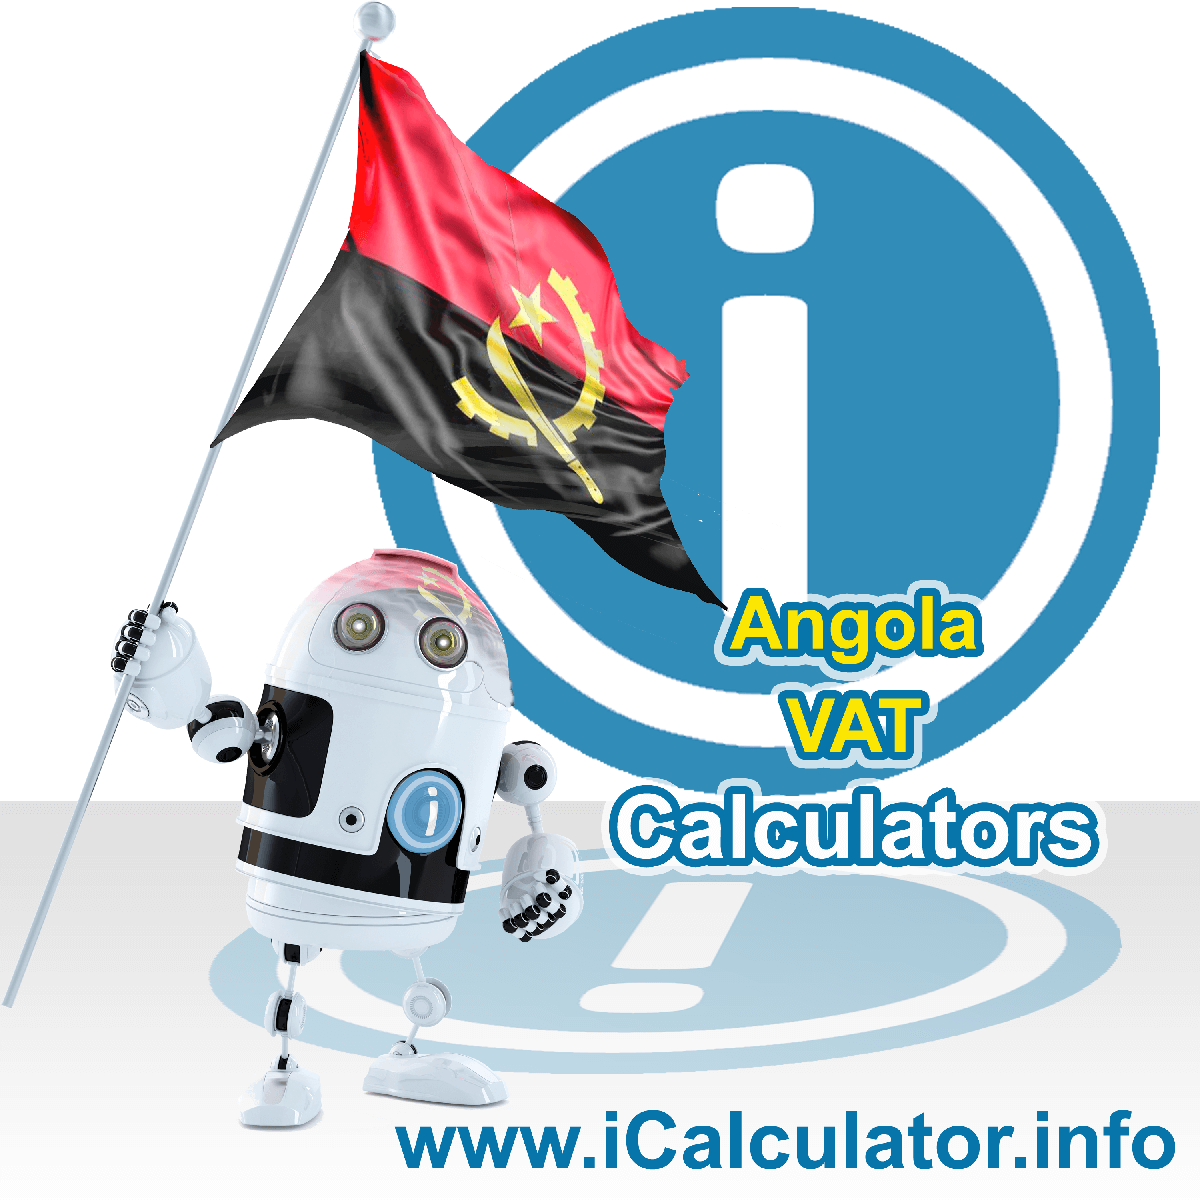 Angola VAT Calculator. This image shows the Angola flag and information relating to the VAT formula used for calculating Value Added Tax in Angola using the Angola VAT Calculator in 2023